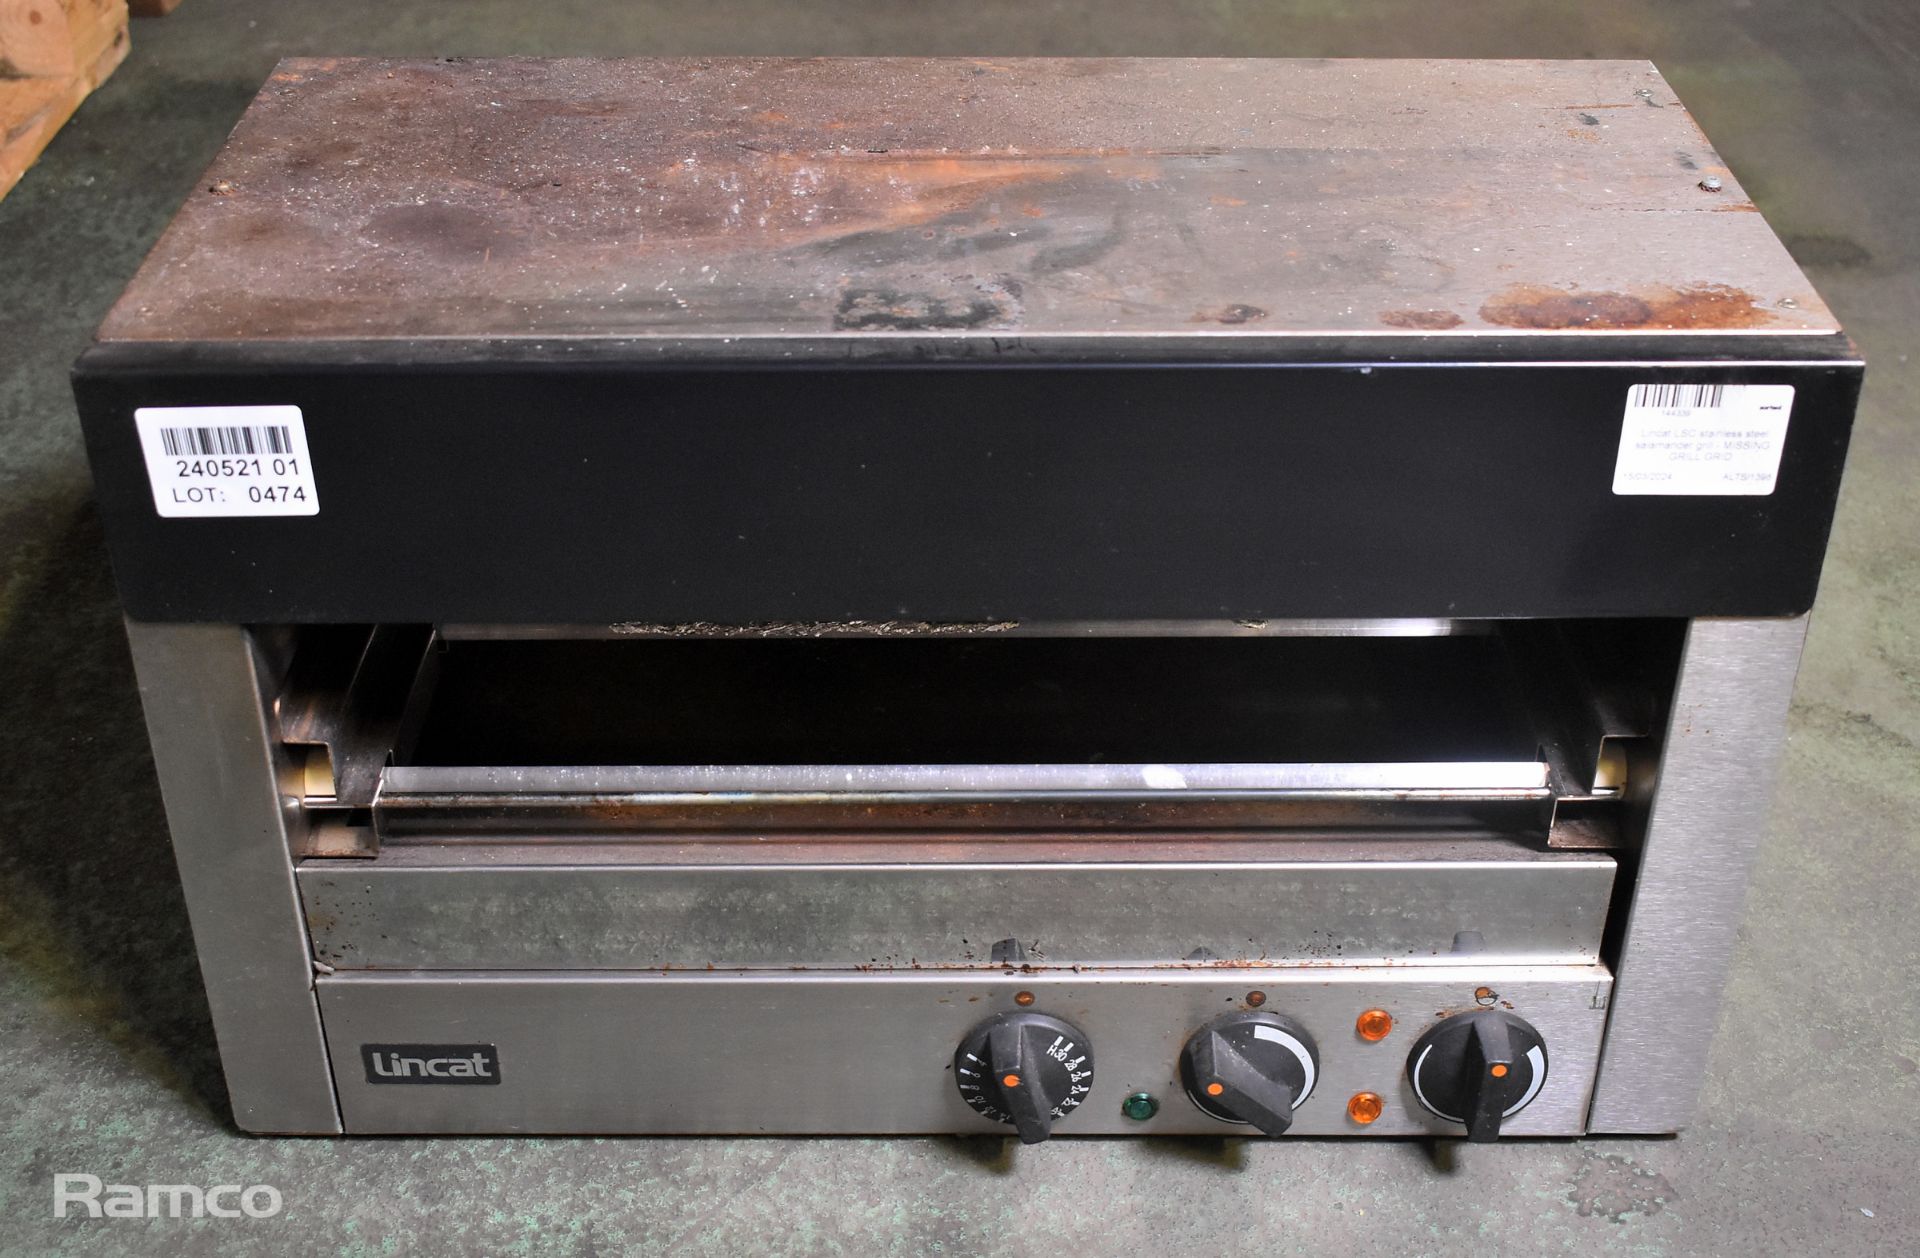 Lincat LSC stainless steel salamander grill - MISSING GRILL GRID